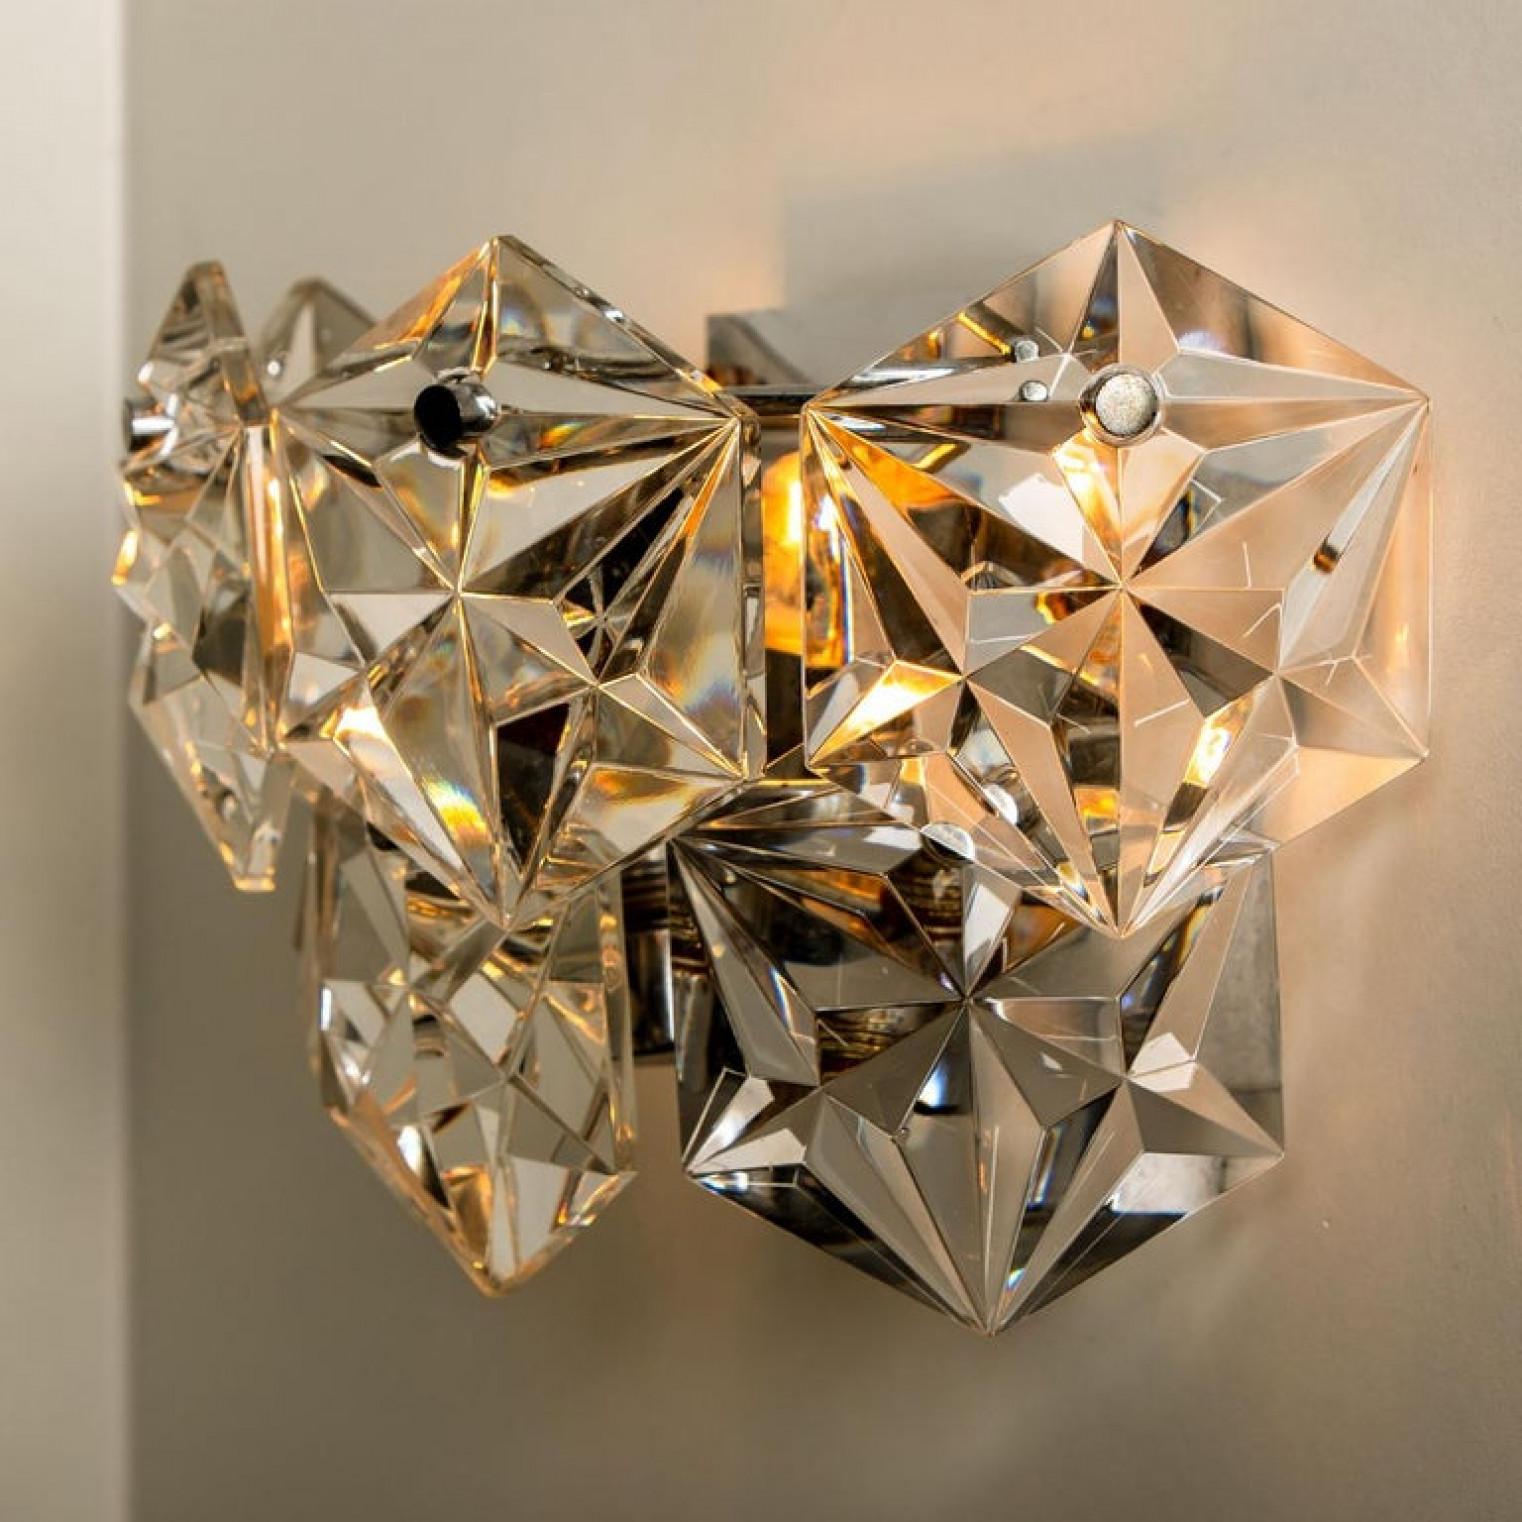 1 of the 4 Faceted Crystal and Chrome Sconces by Kinkeldey, Germany, 1970s For Sale 2